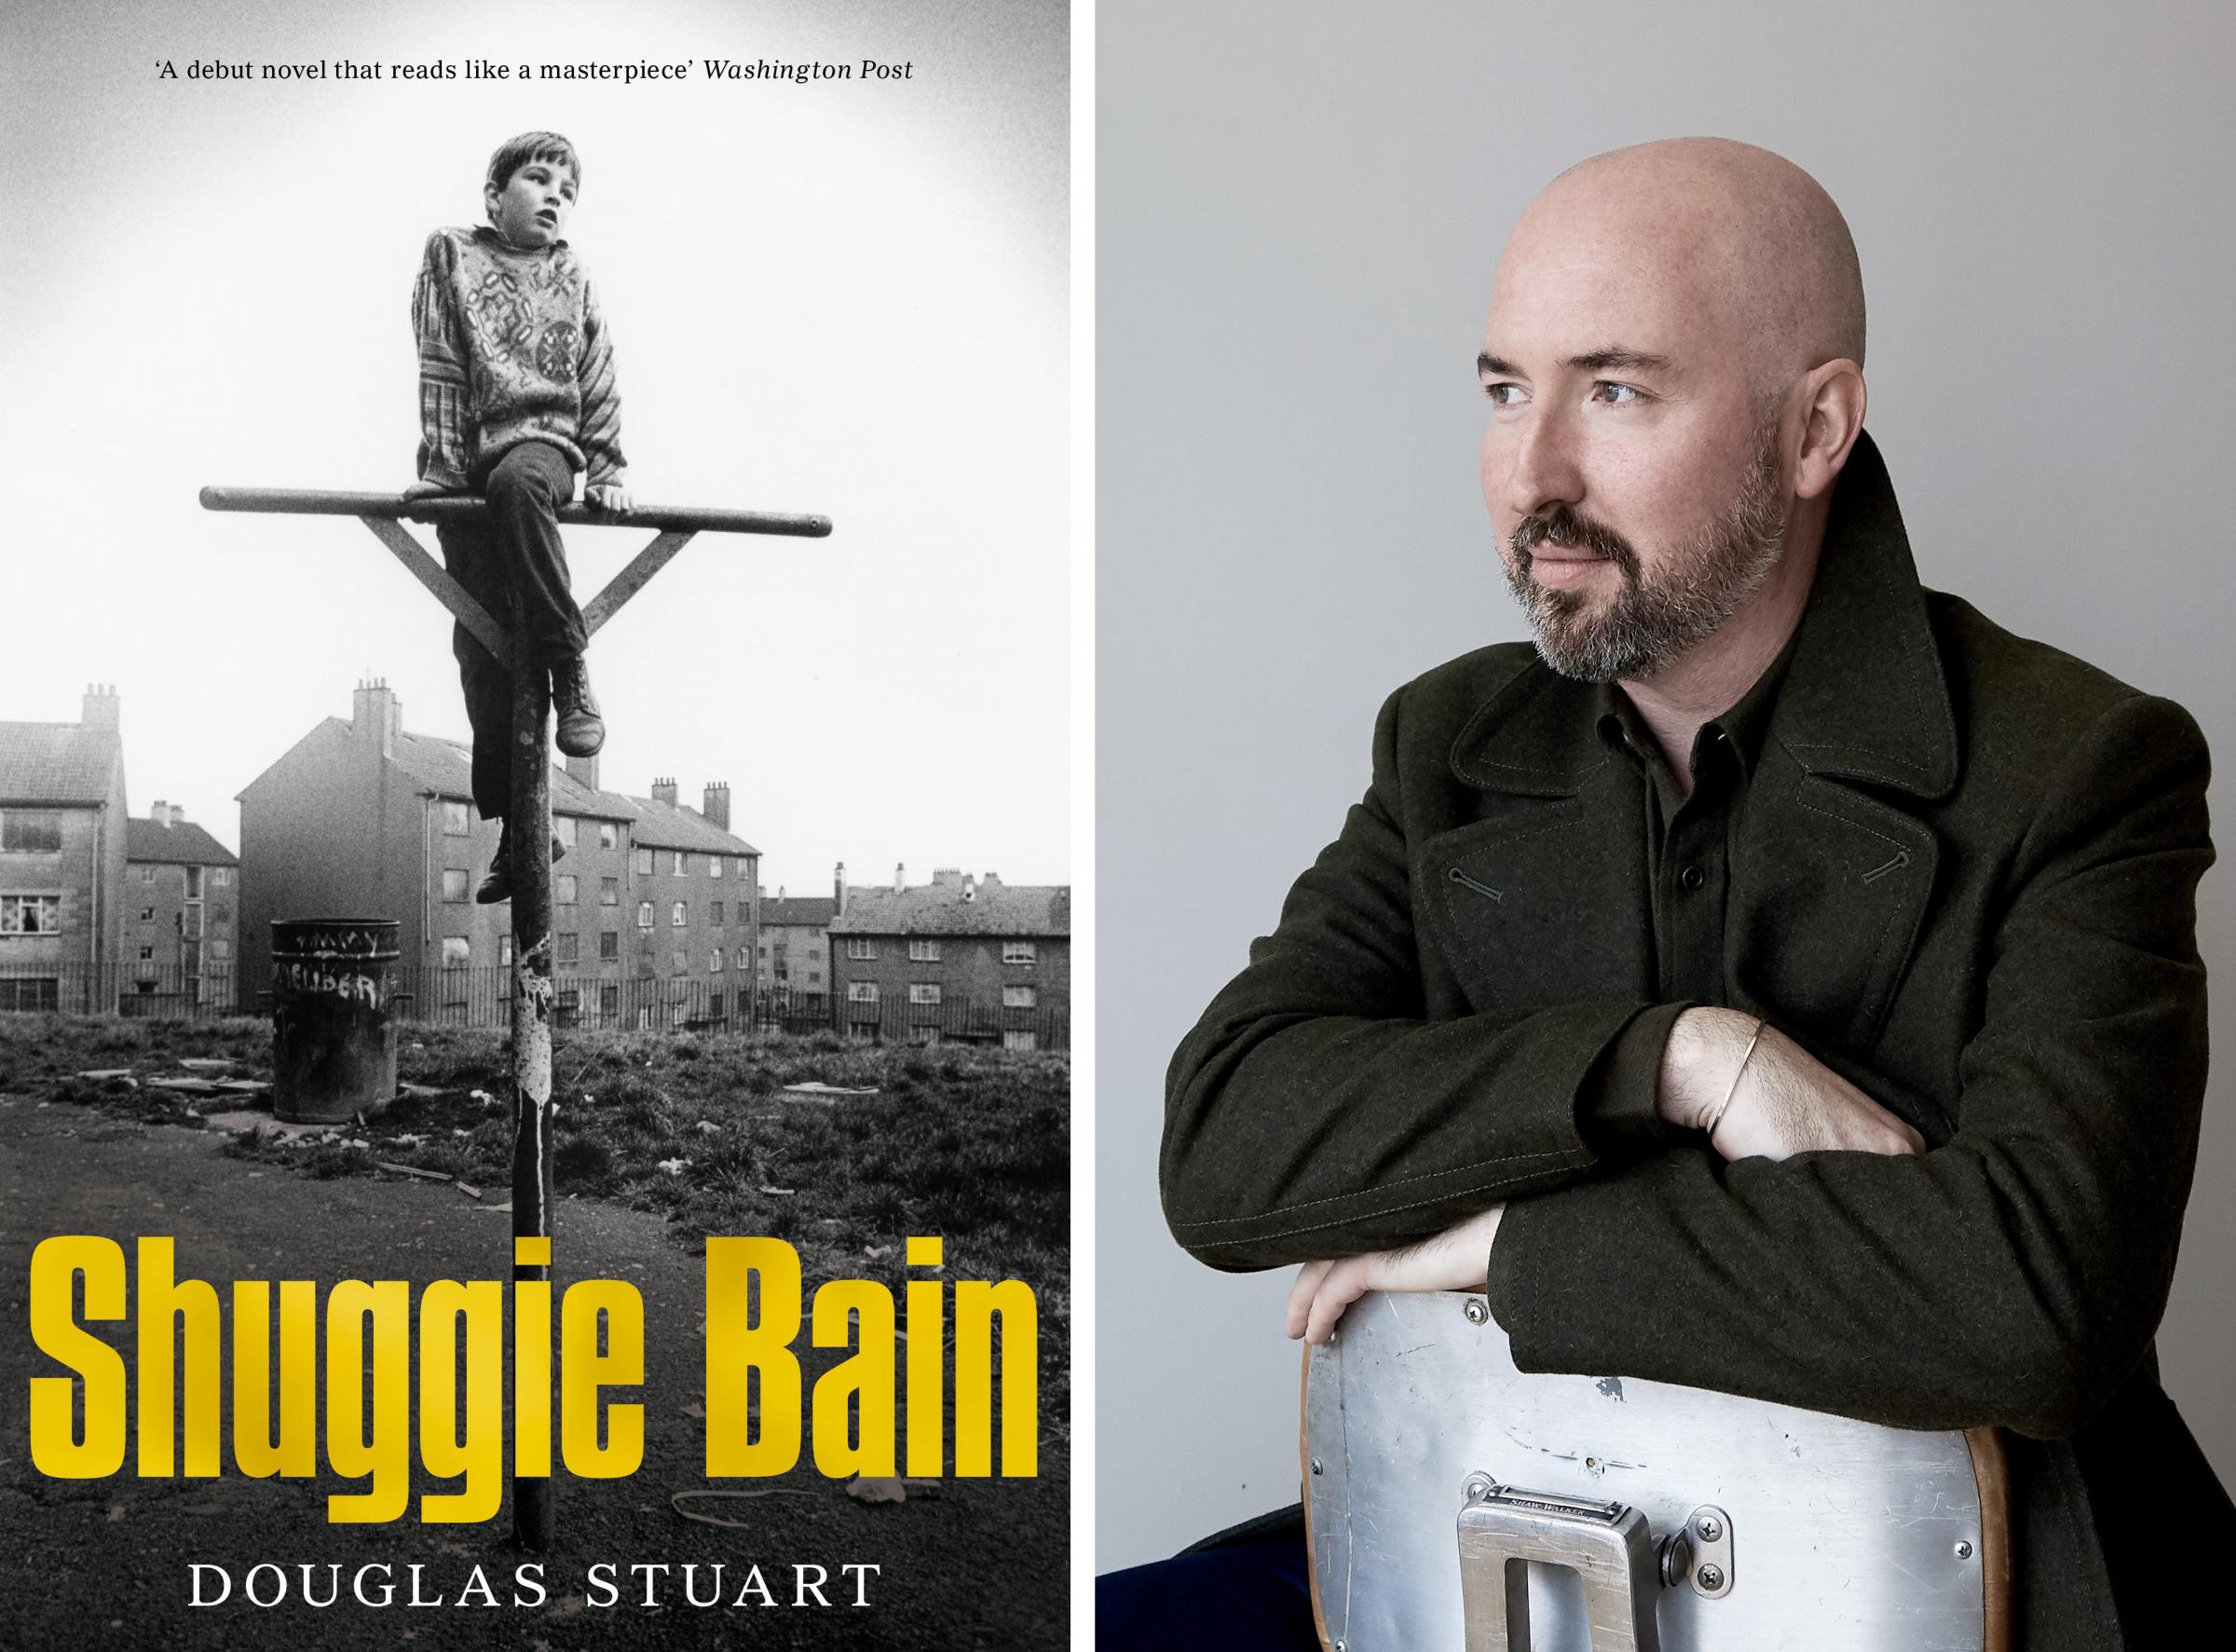 Douglas Stuart with the cover of his first book, Shuggie Bain.